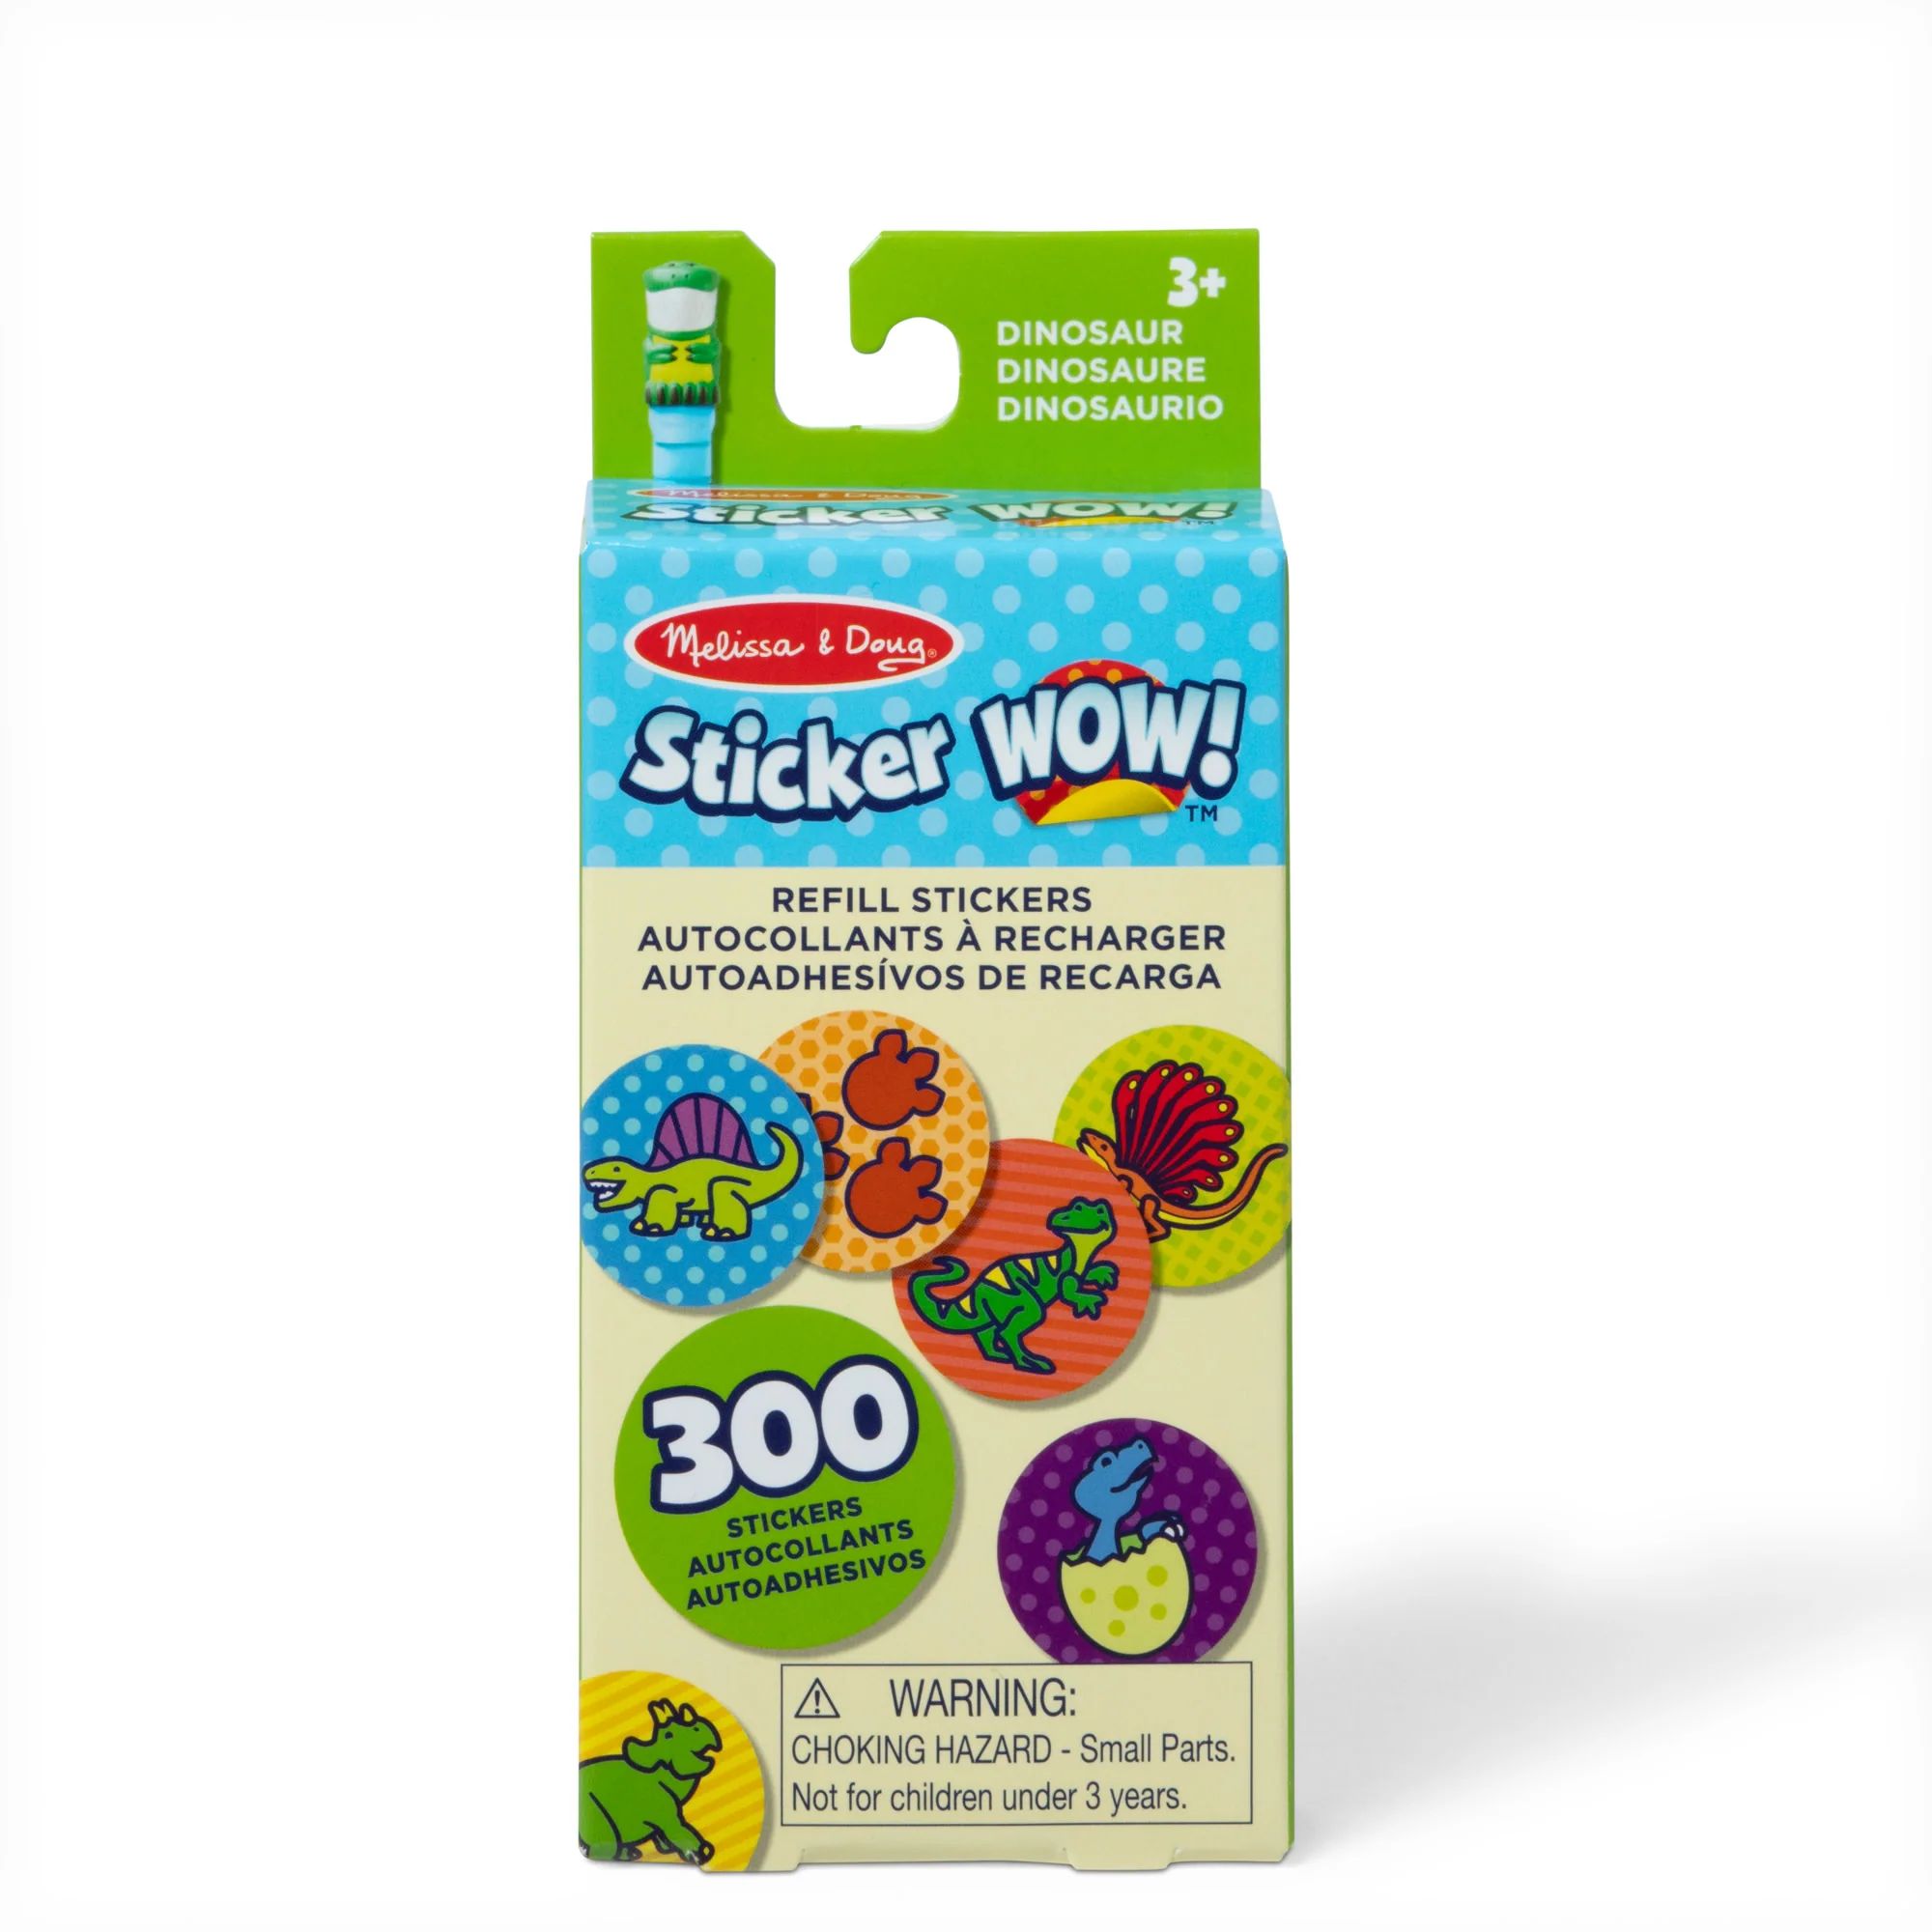 Sticker WOW!® Refill Stickers – Dinosaur (Stickers Only, 300+) | Melissa and Doug